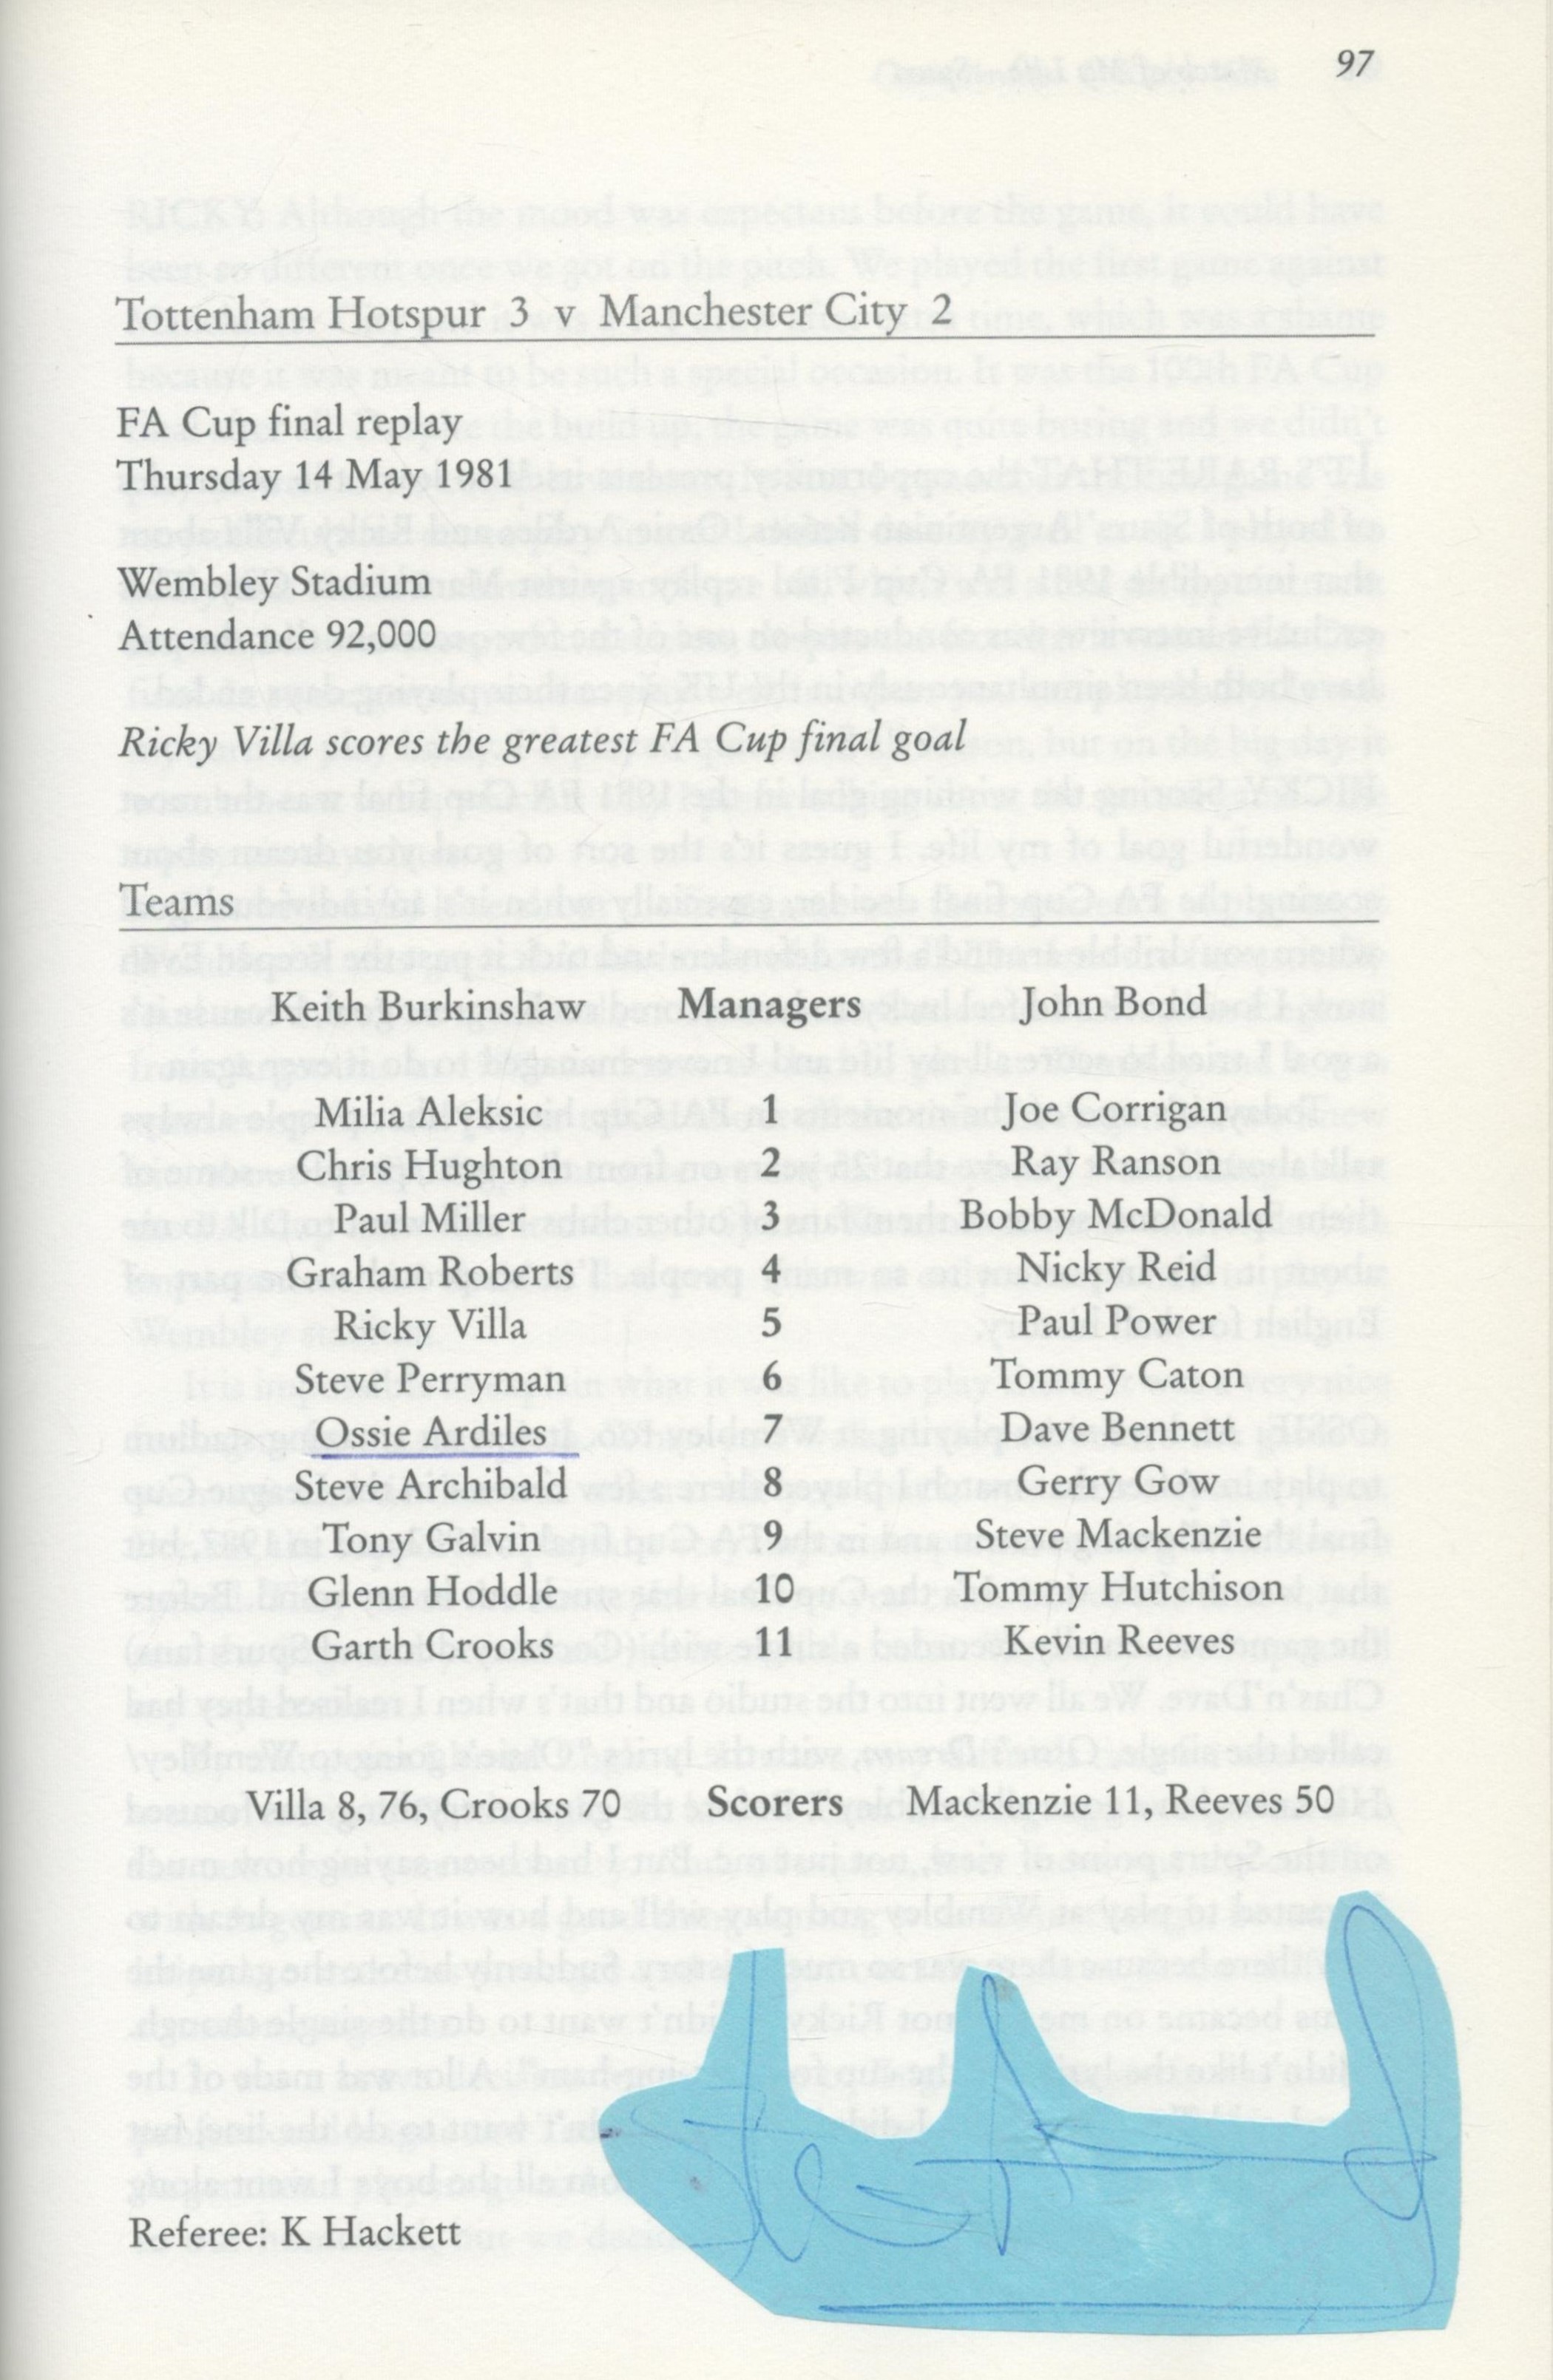 Match of my life - Spurs multi-signed hardback book. Signature clippings attached to inside pages. - Image 3 of 6